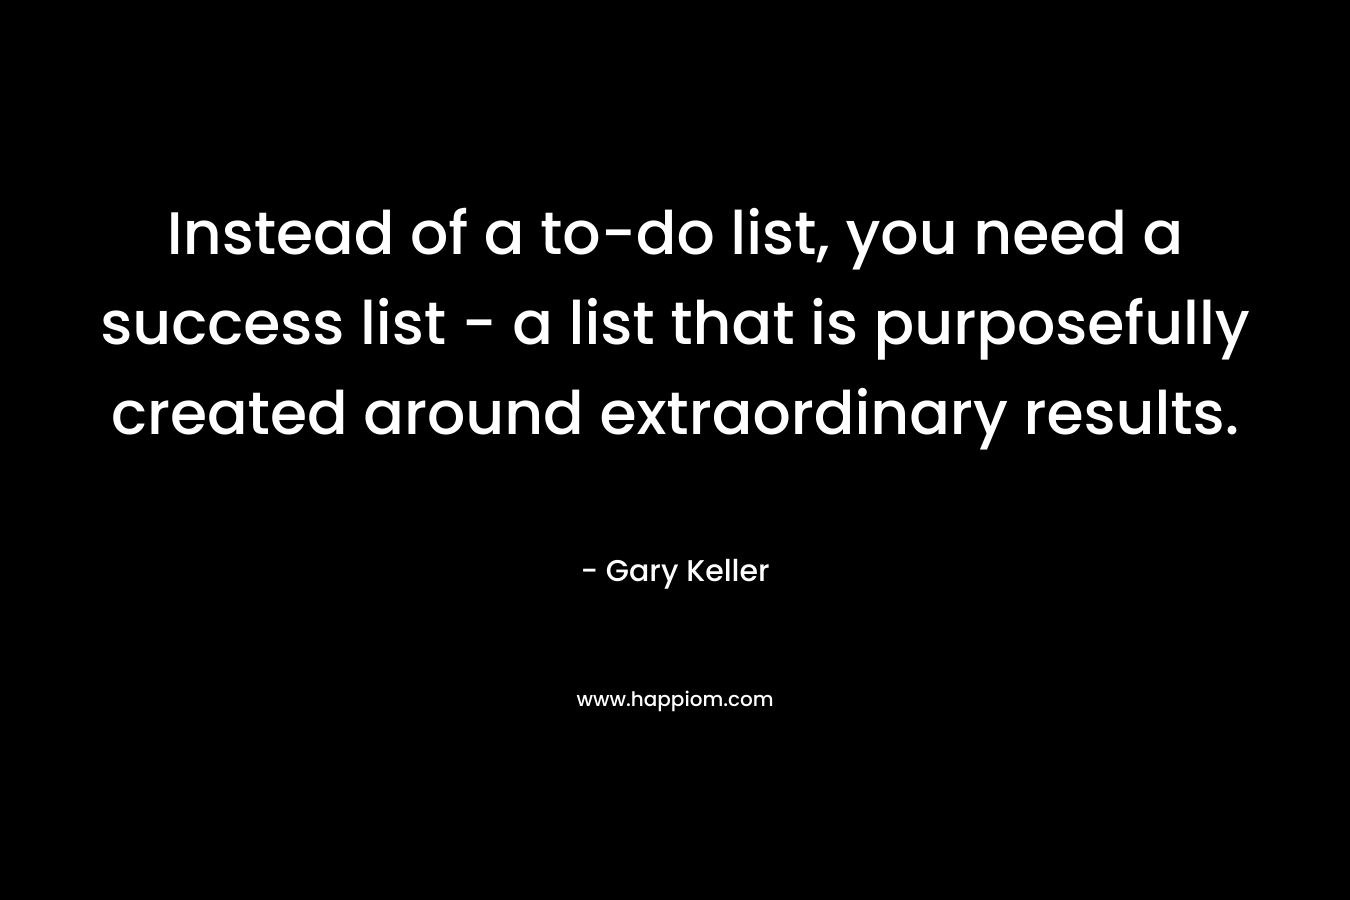 Instead of a to-do list, you need a success list – a list that is purposefully created around extraordinary results. – Gary Keller